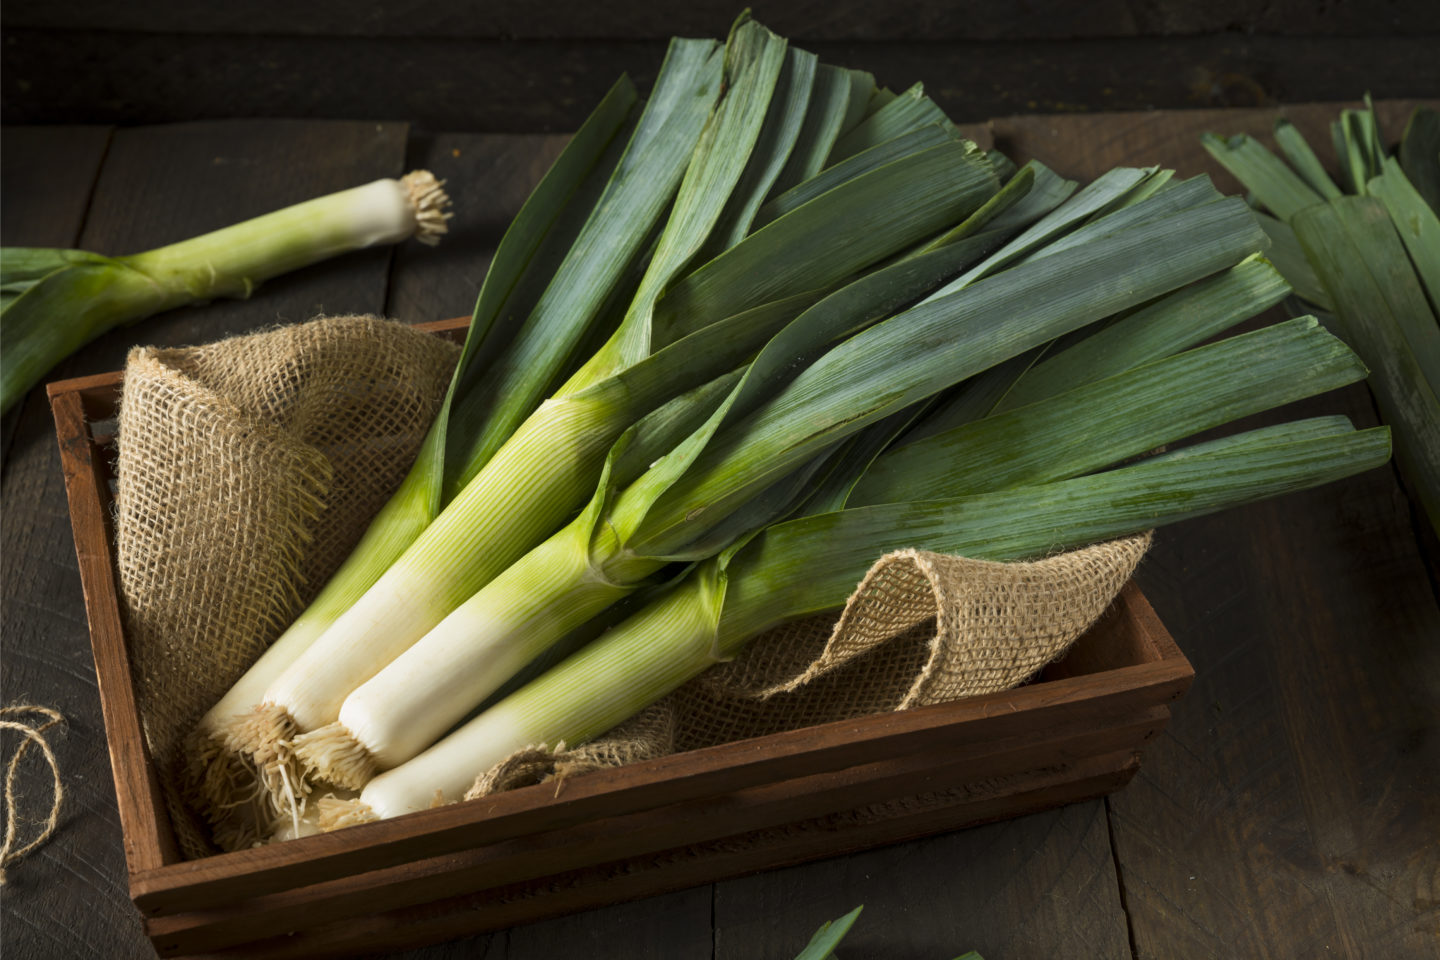 leeks as a green onion substitute